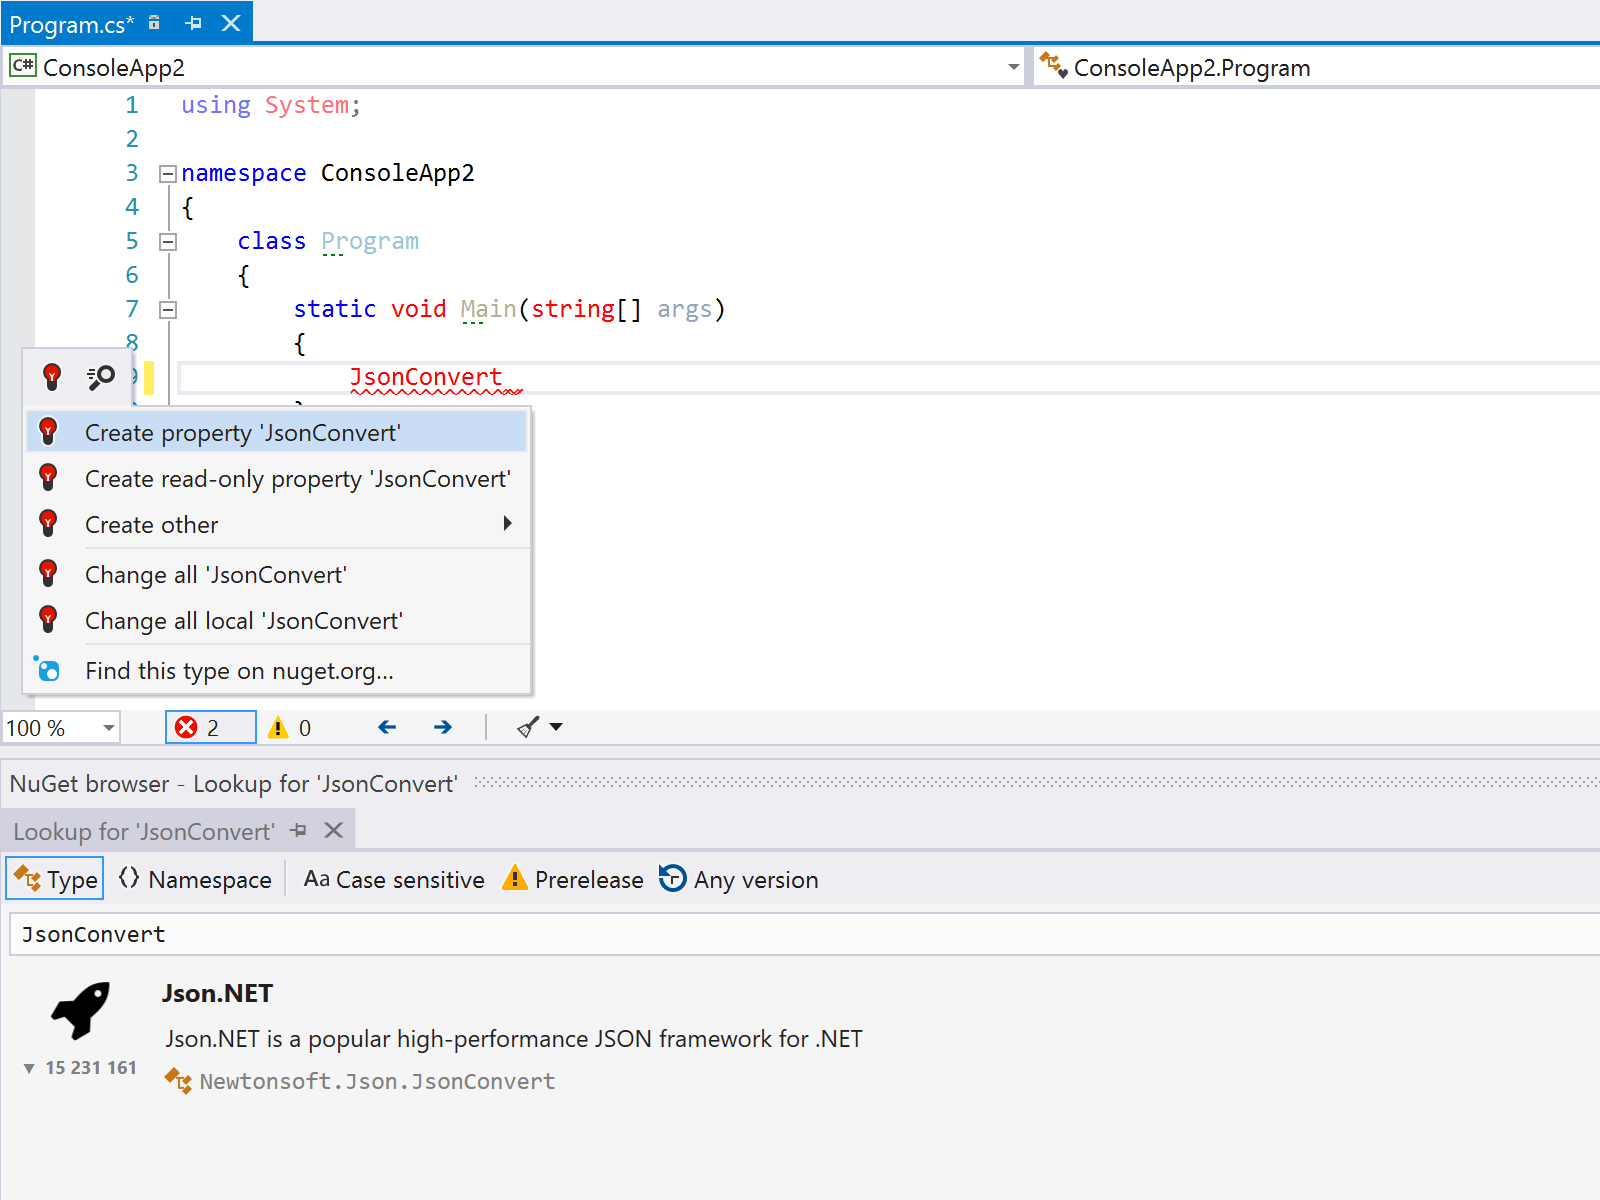 Find type on NuGet.org using our Azure Functions-powered search engine